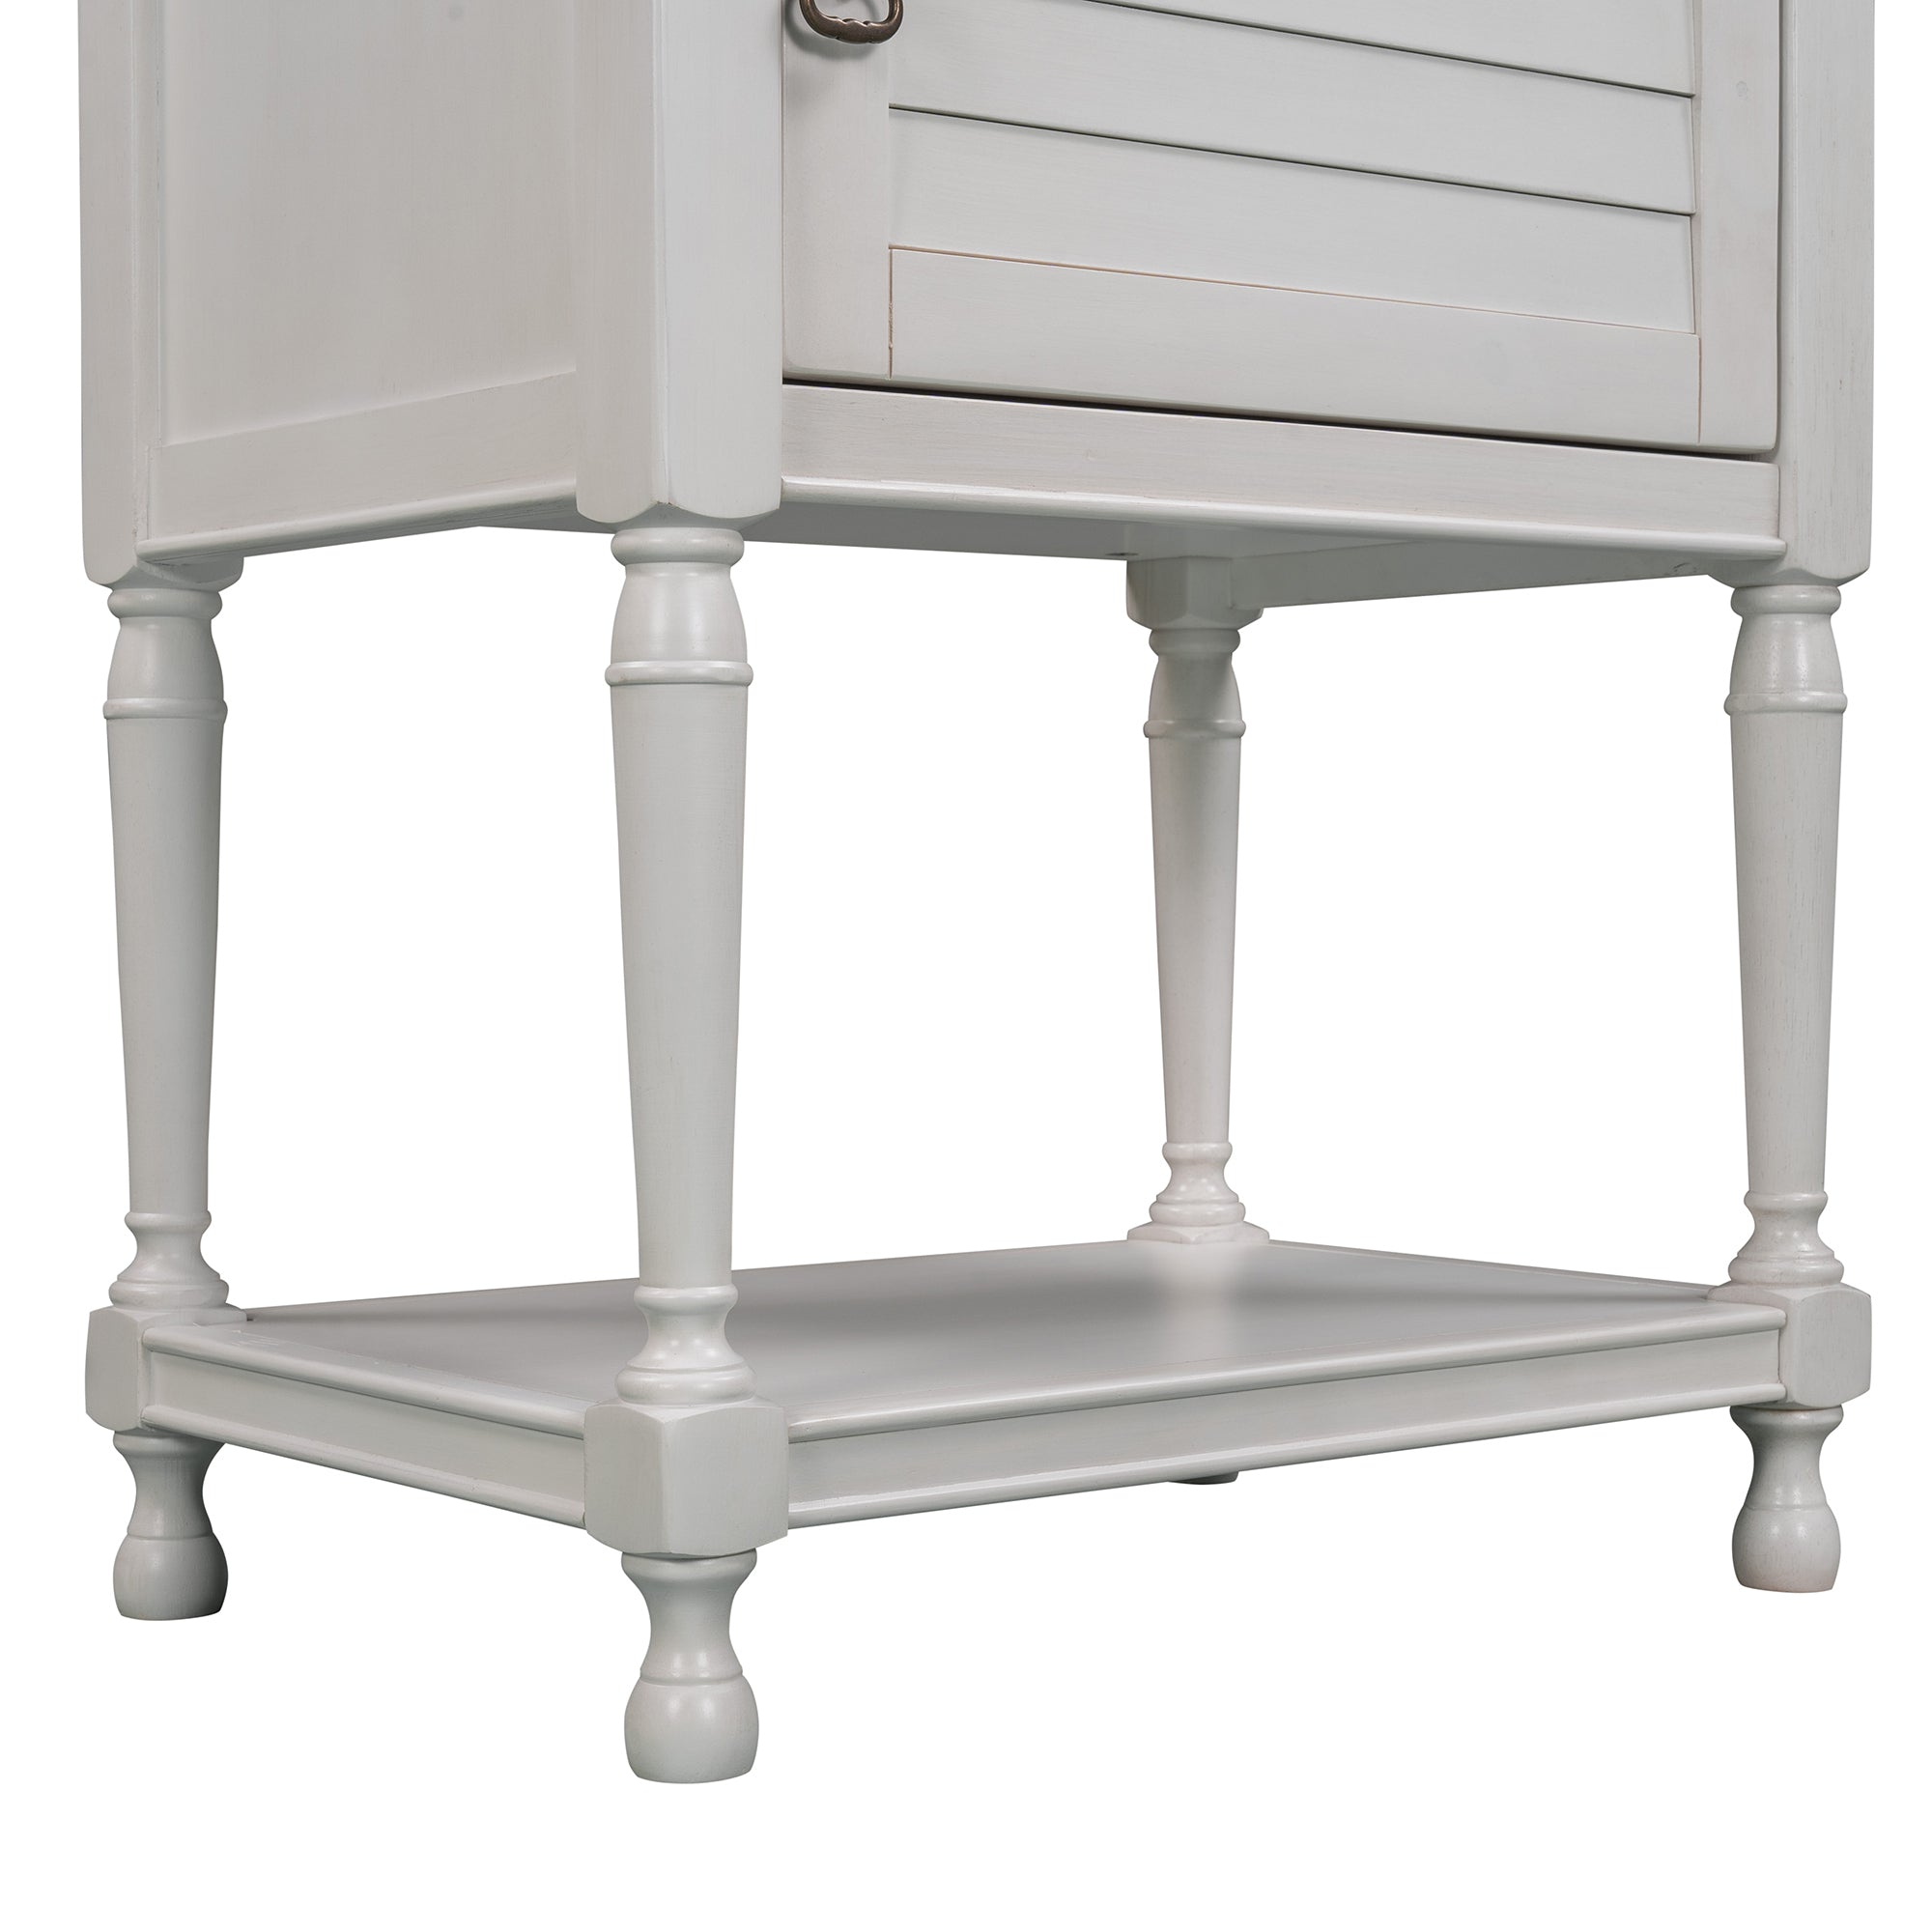 Versatile Nightstand with Two Built-in Shelves Cabinet (White)